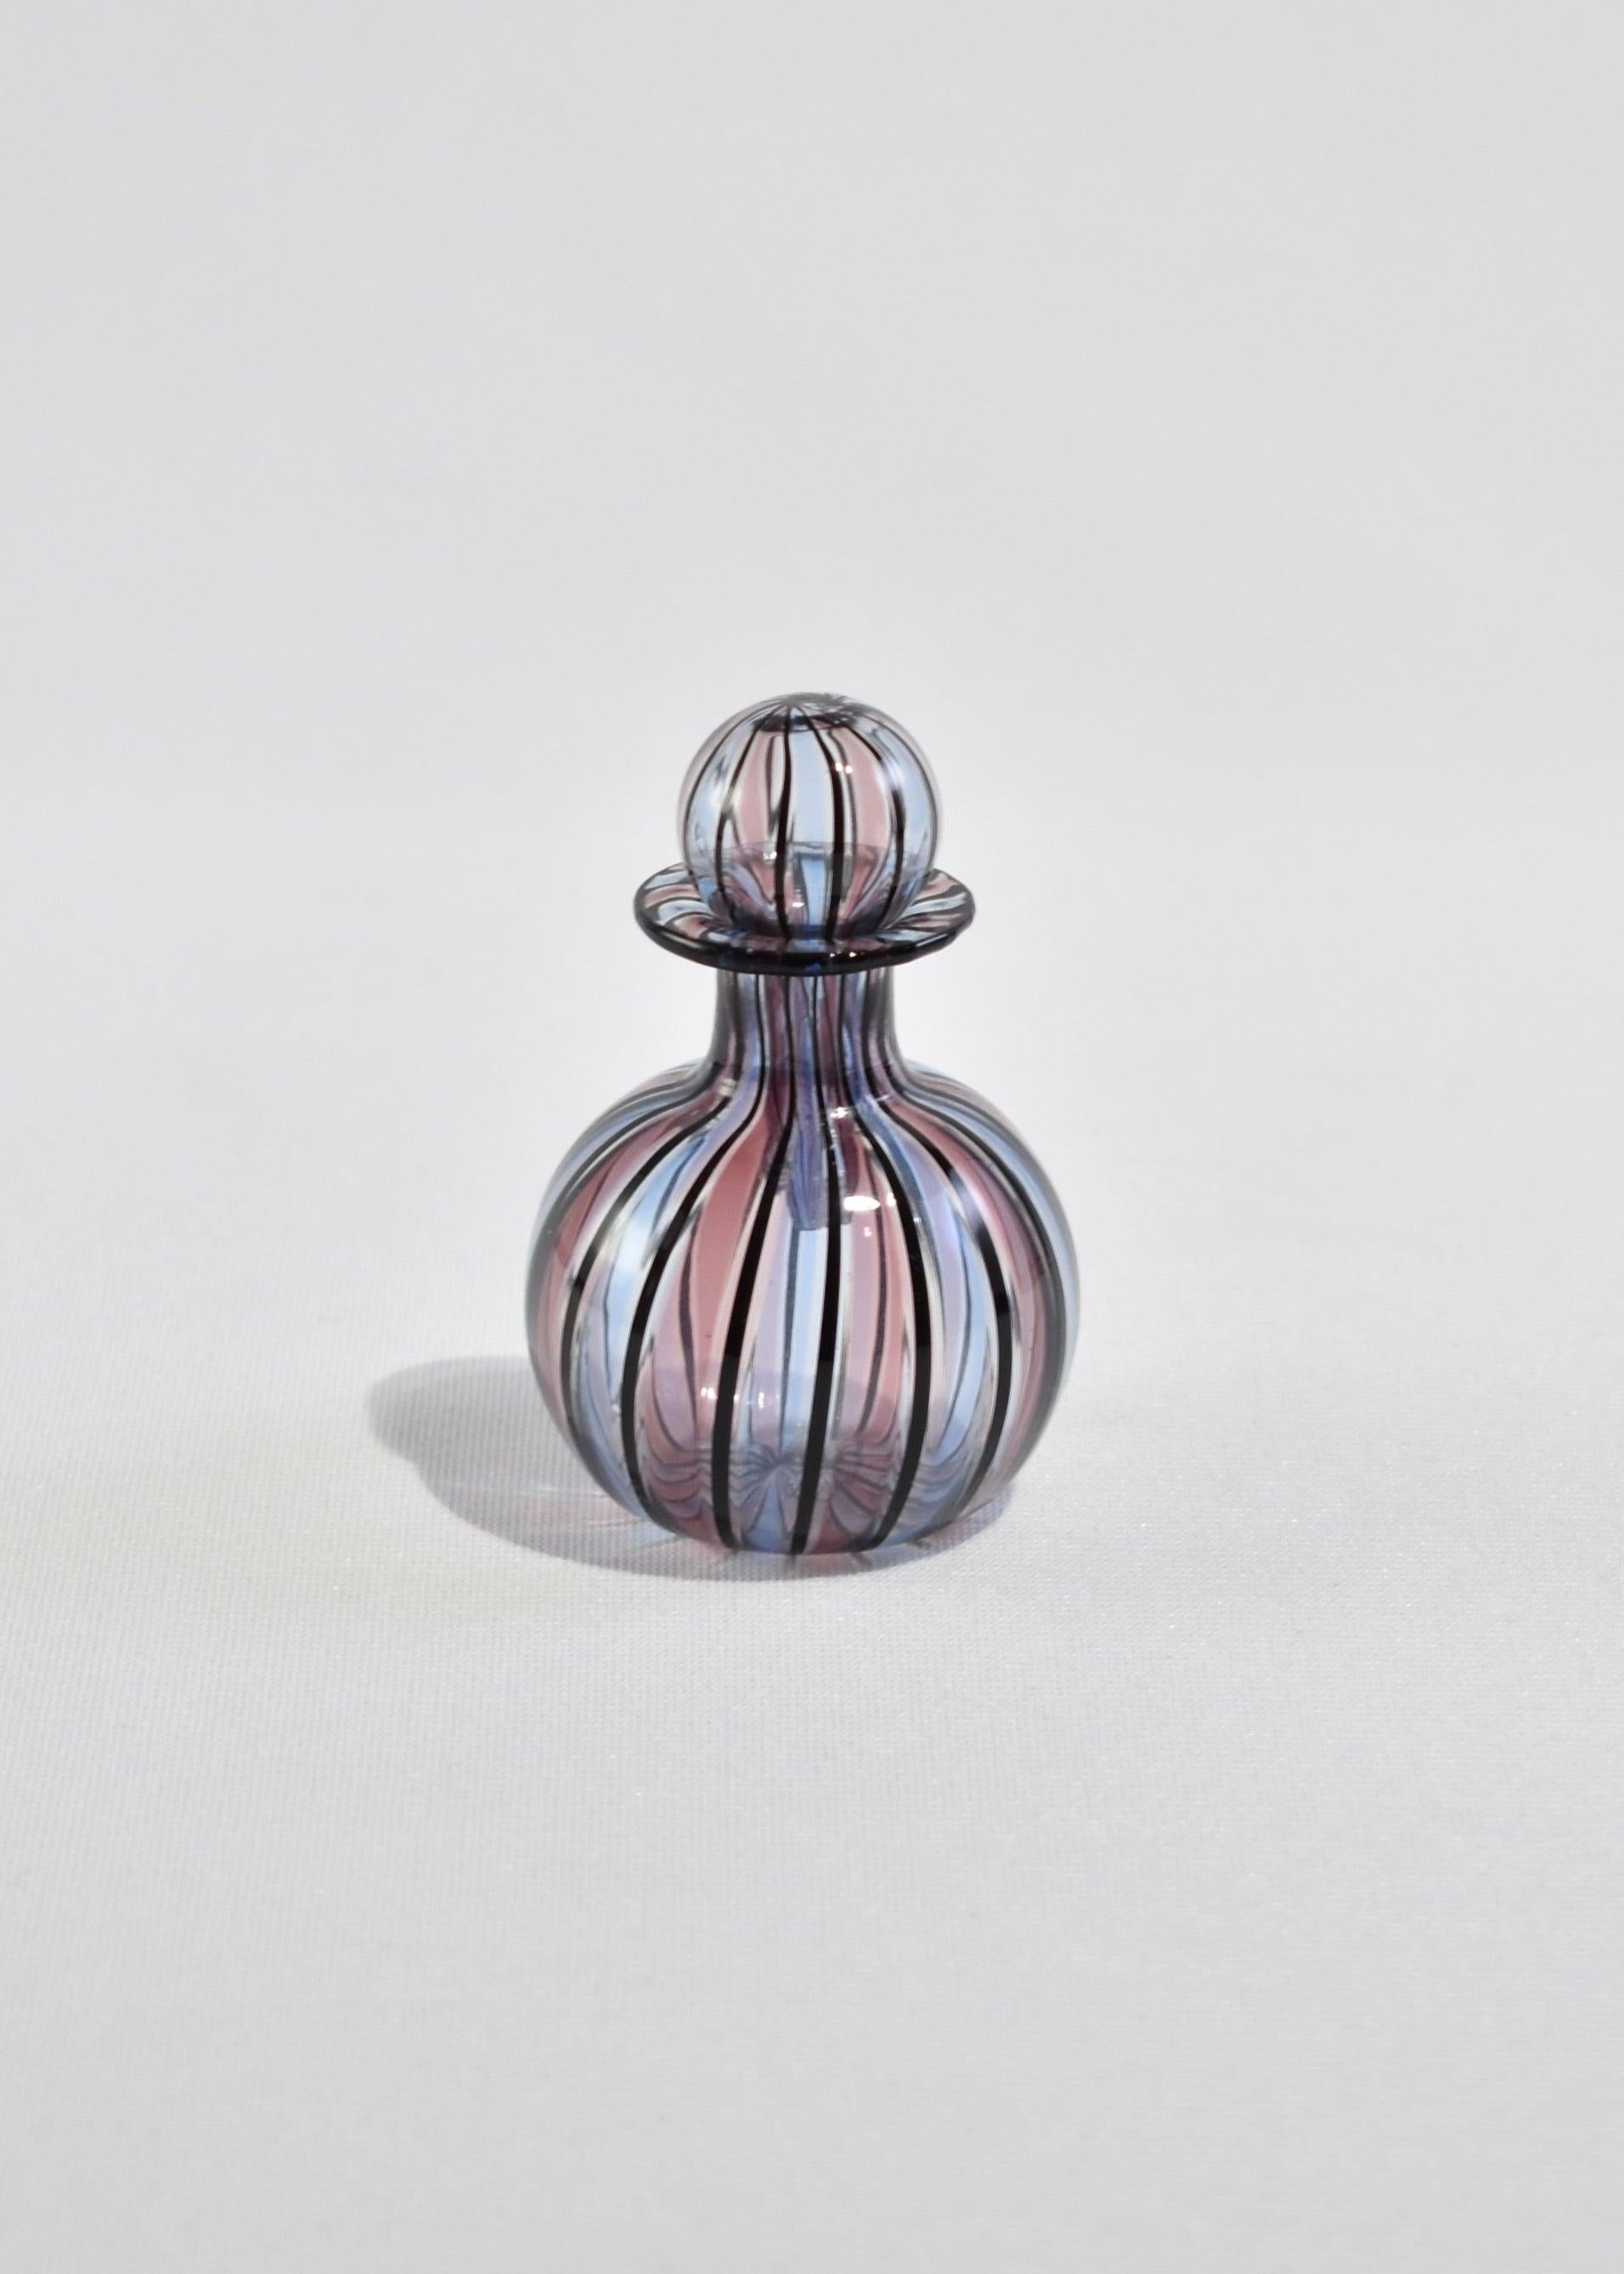 Vintage petite blown glass perfume bottle with colorful stripe detail. ?Made in Murano, Italy.
 